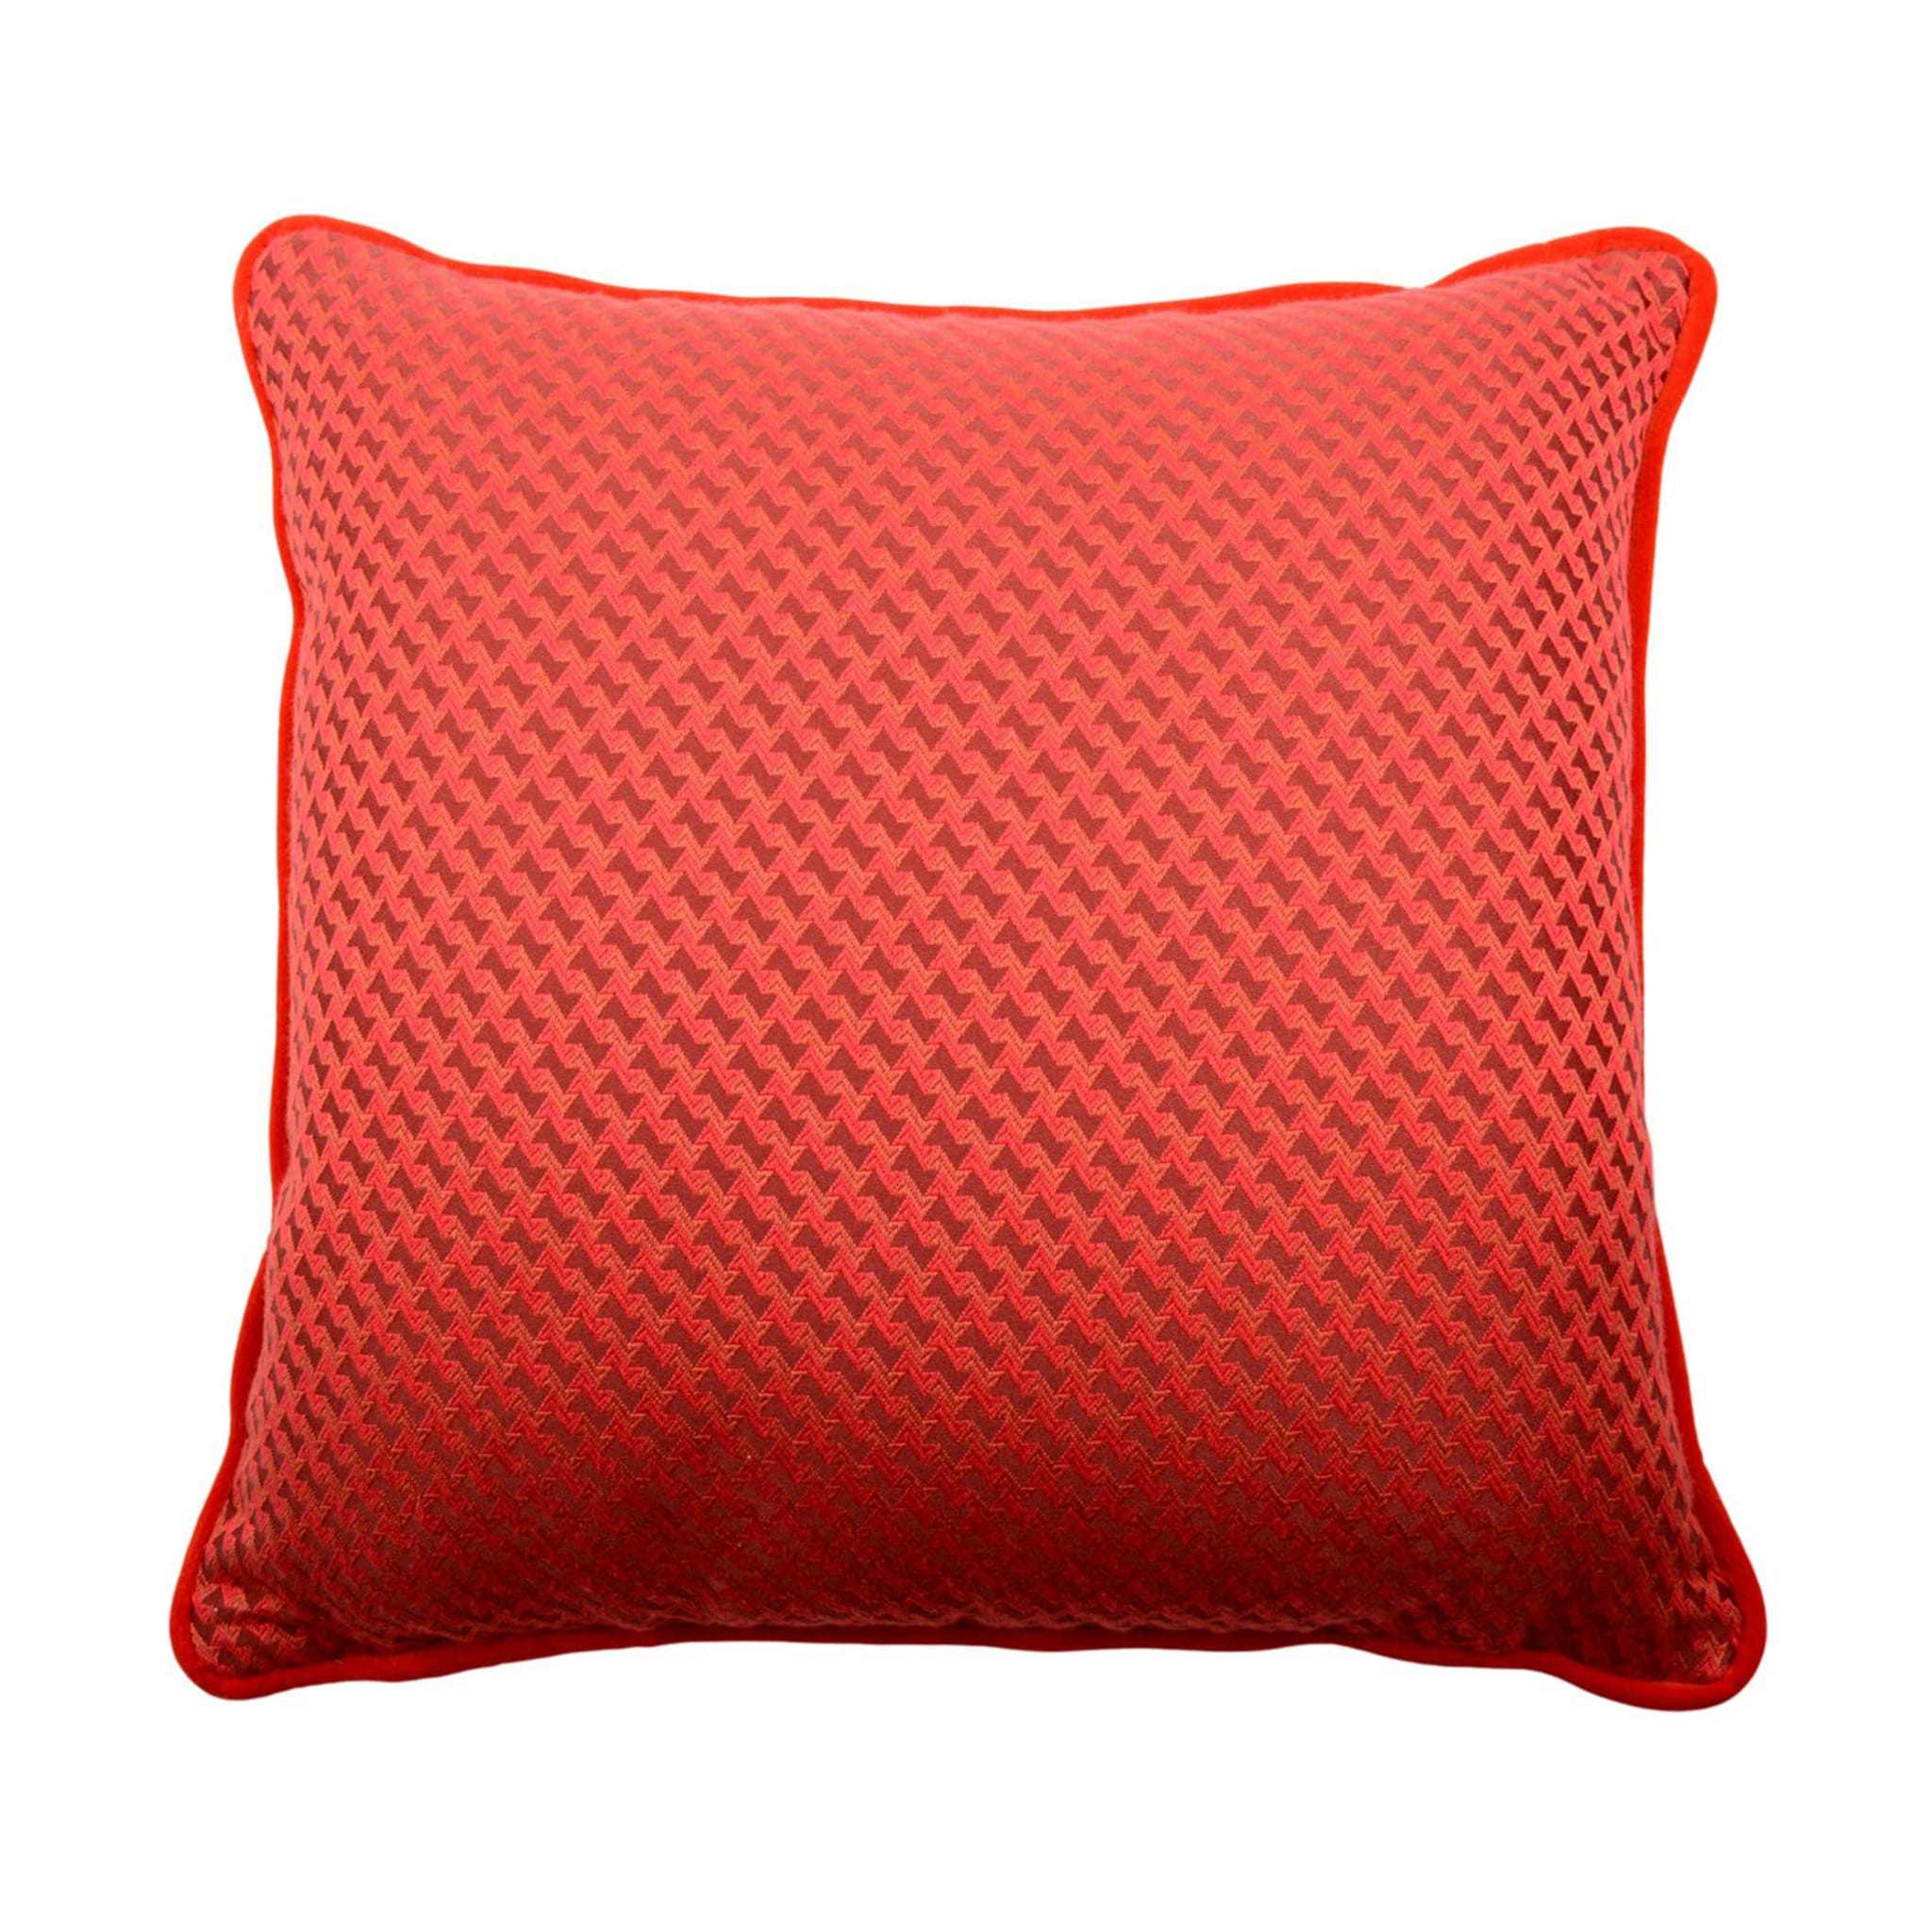 Red Carrè Cushion in micro patterned jacquard fabric - Main view